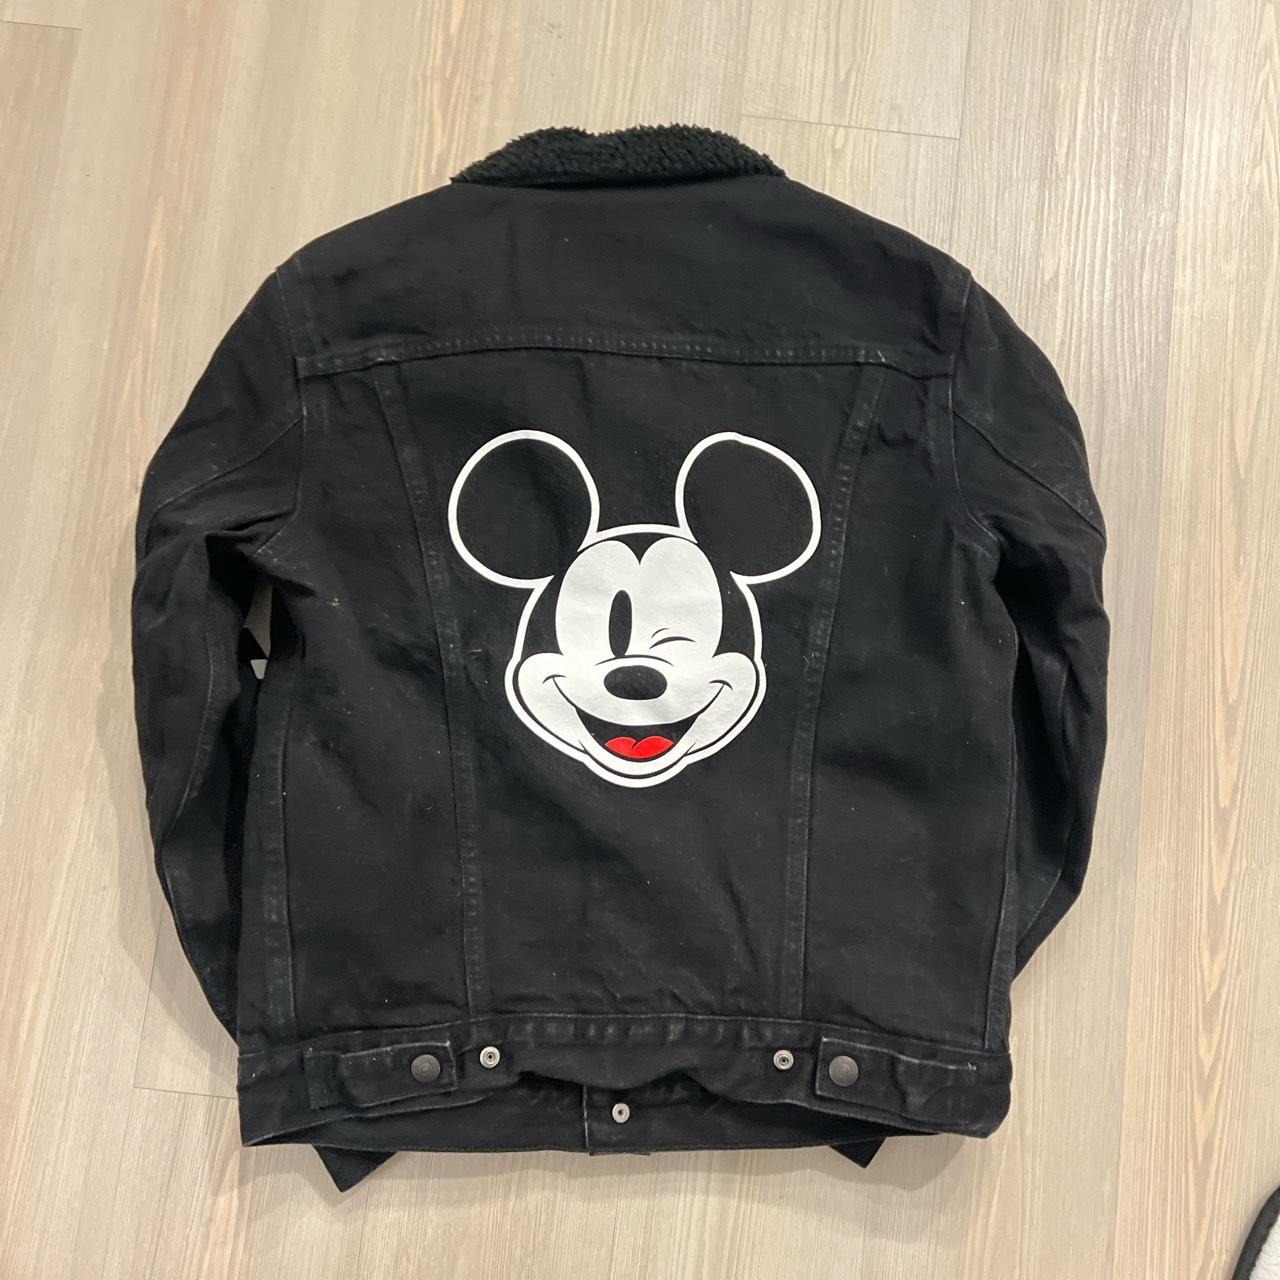 LEVI’S x DISNEY JEAN JACKET LINED WITH WOOL INTERIOR... - Depop